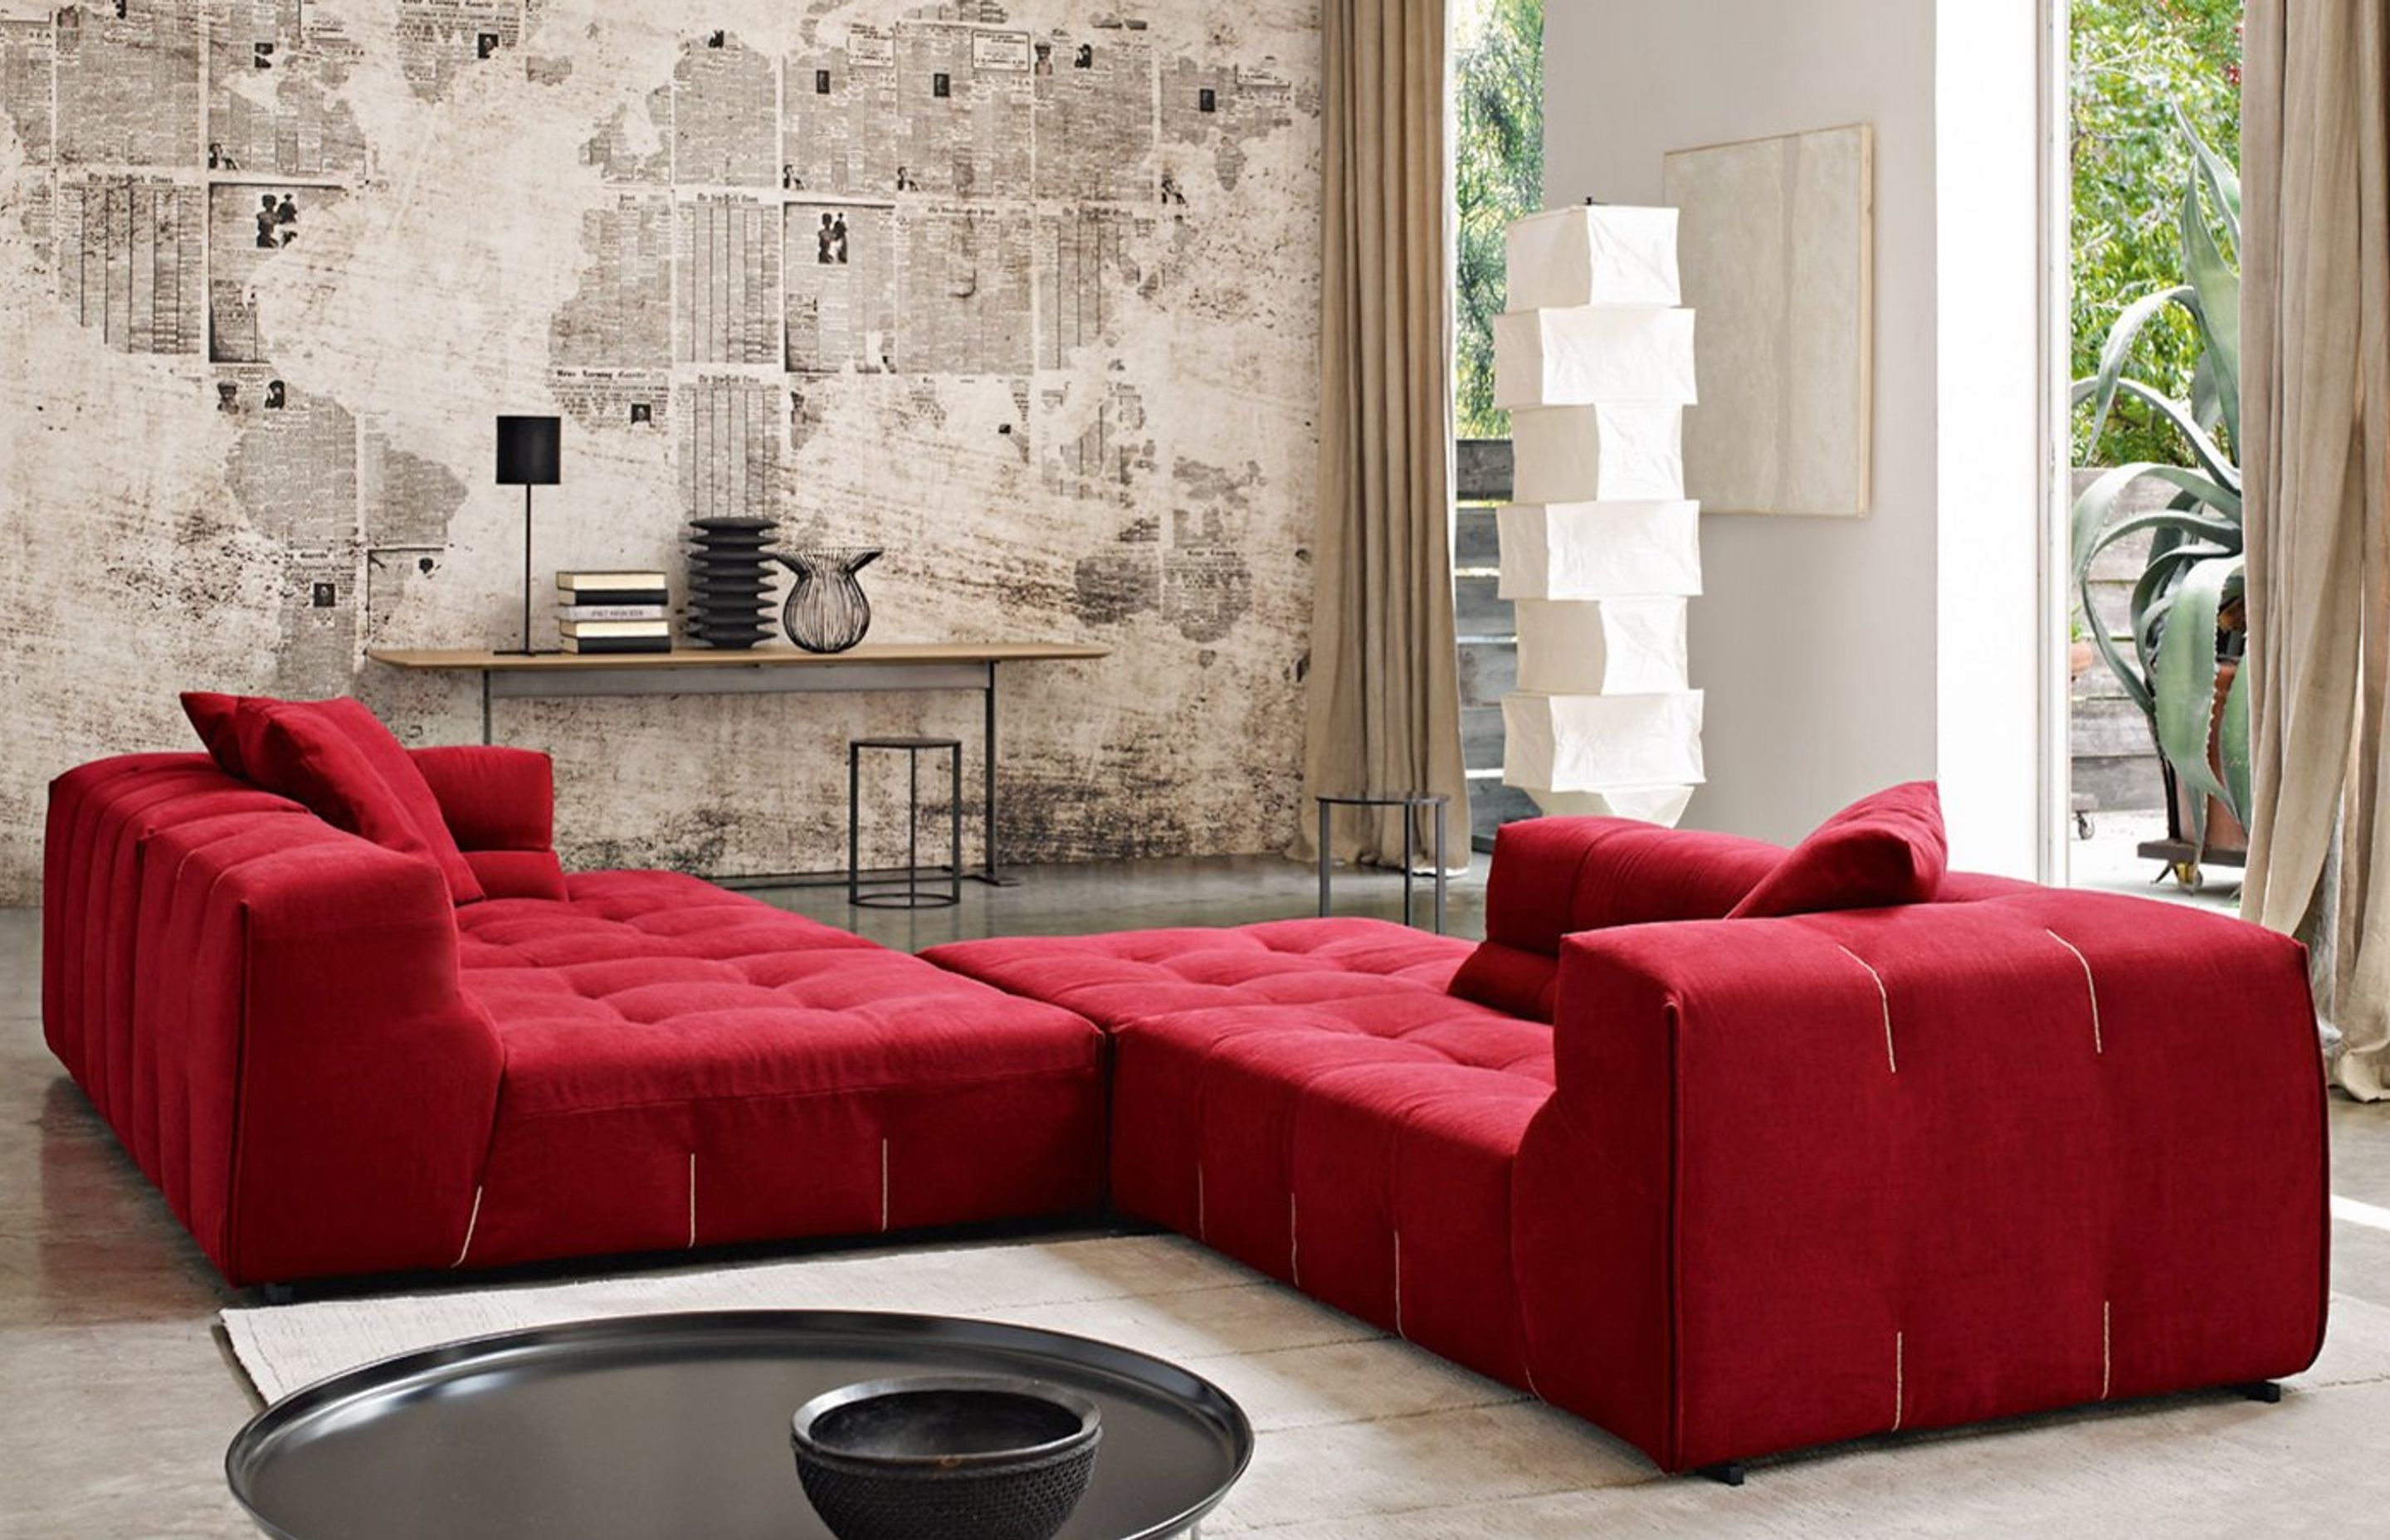 Tufty-Too Sofa by Space Furniture